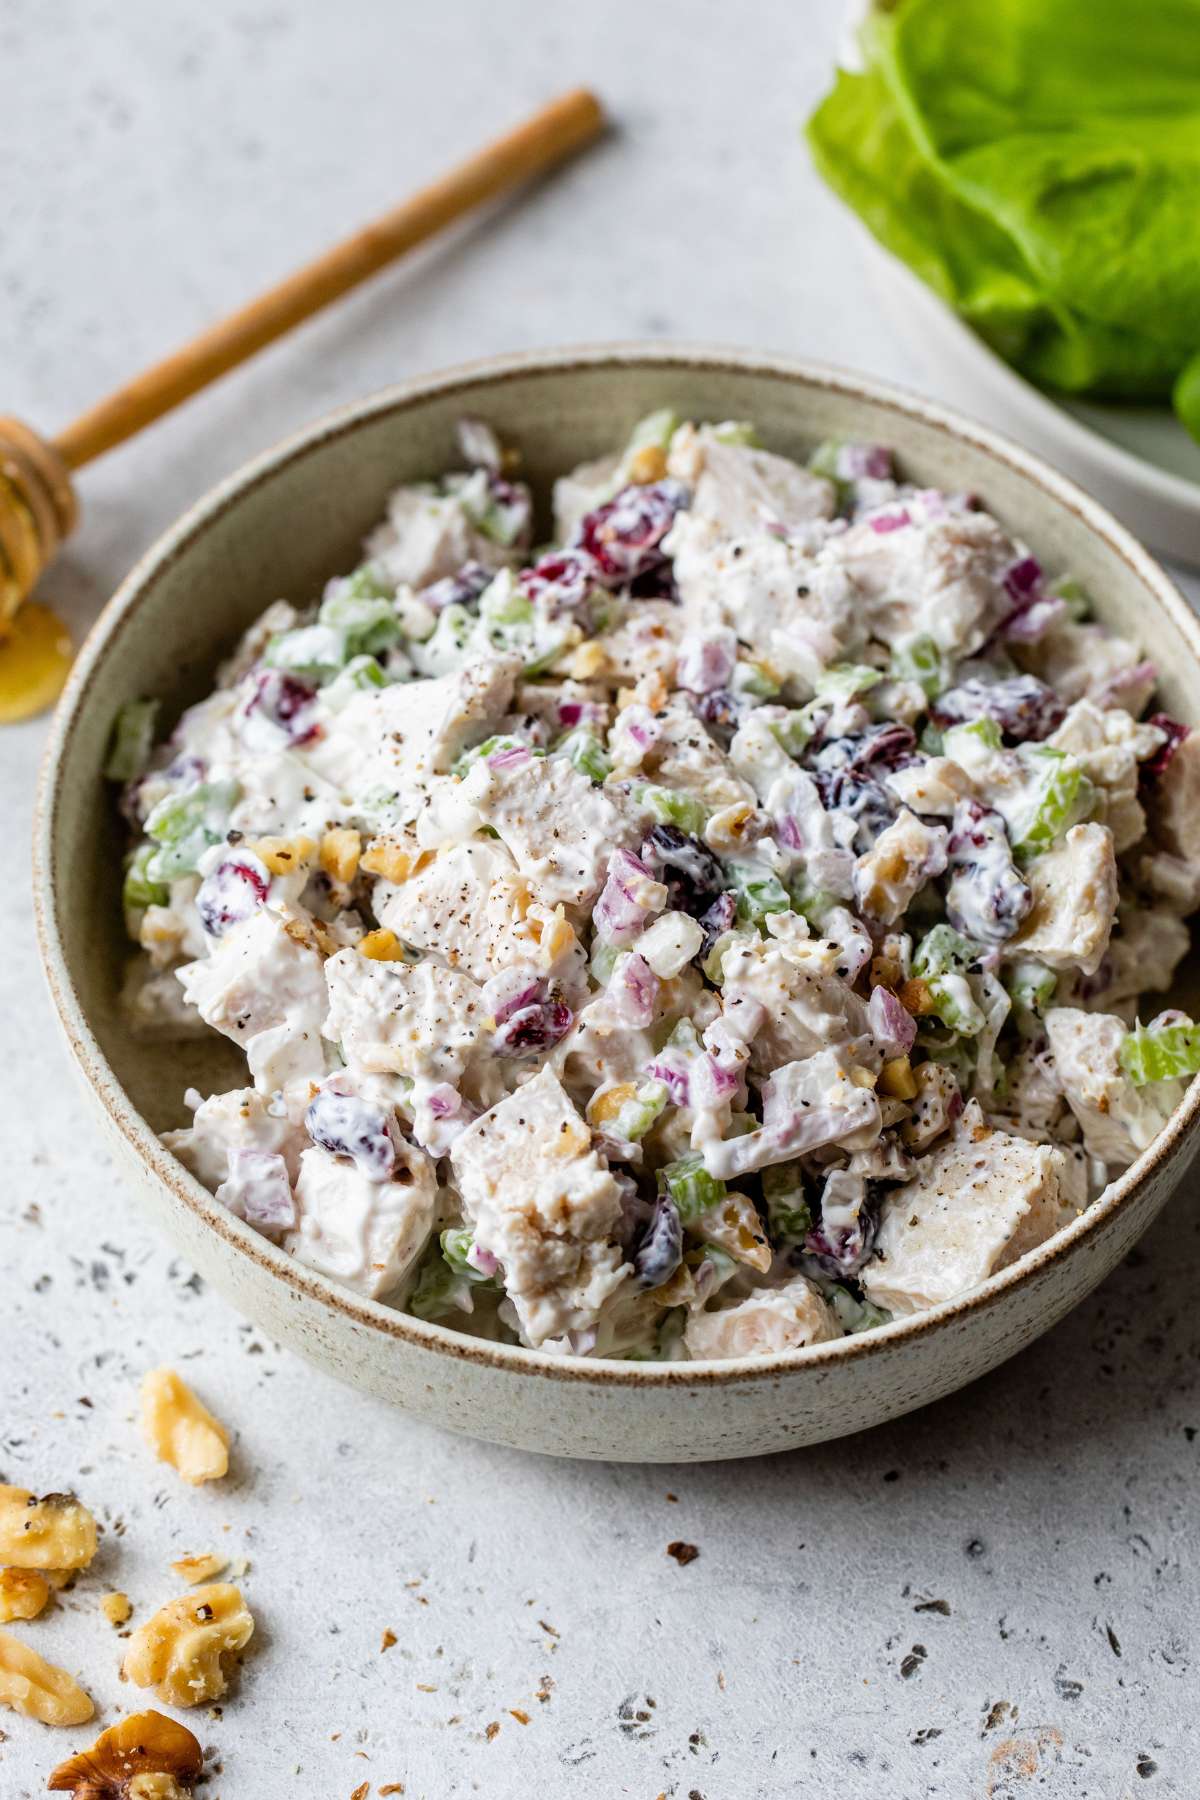 Chicken salad made with cranberries, walnuts and red onion.